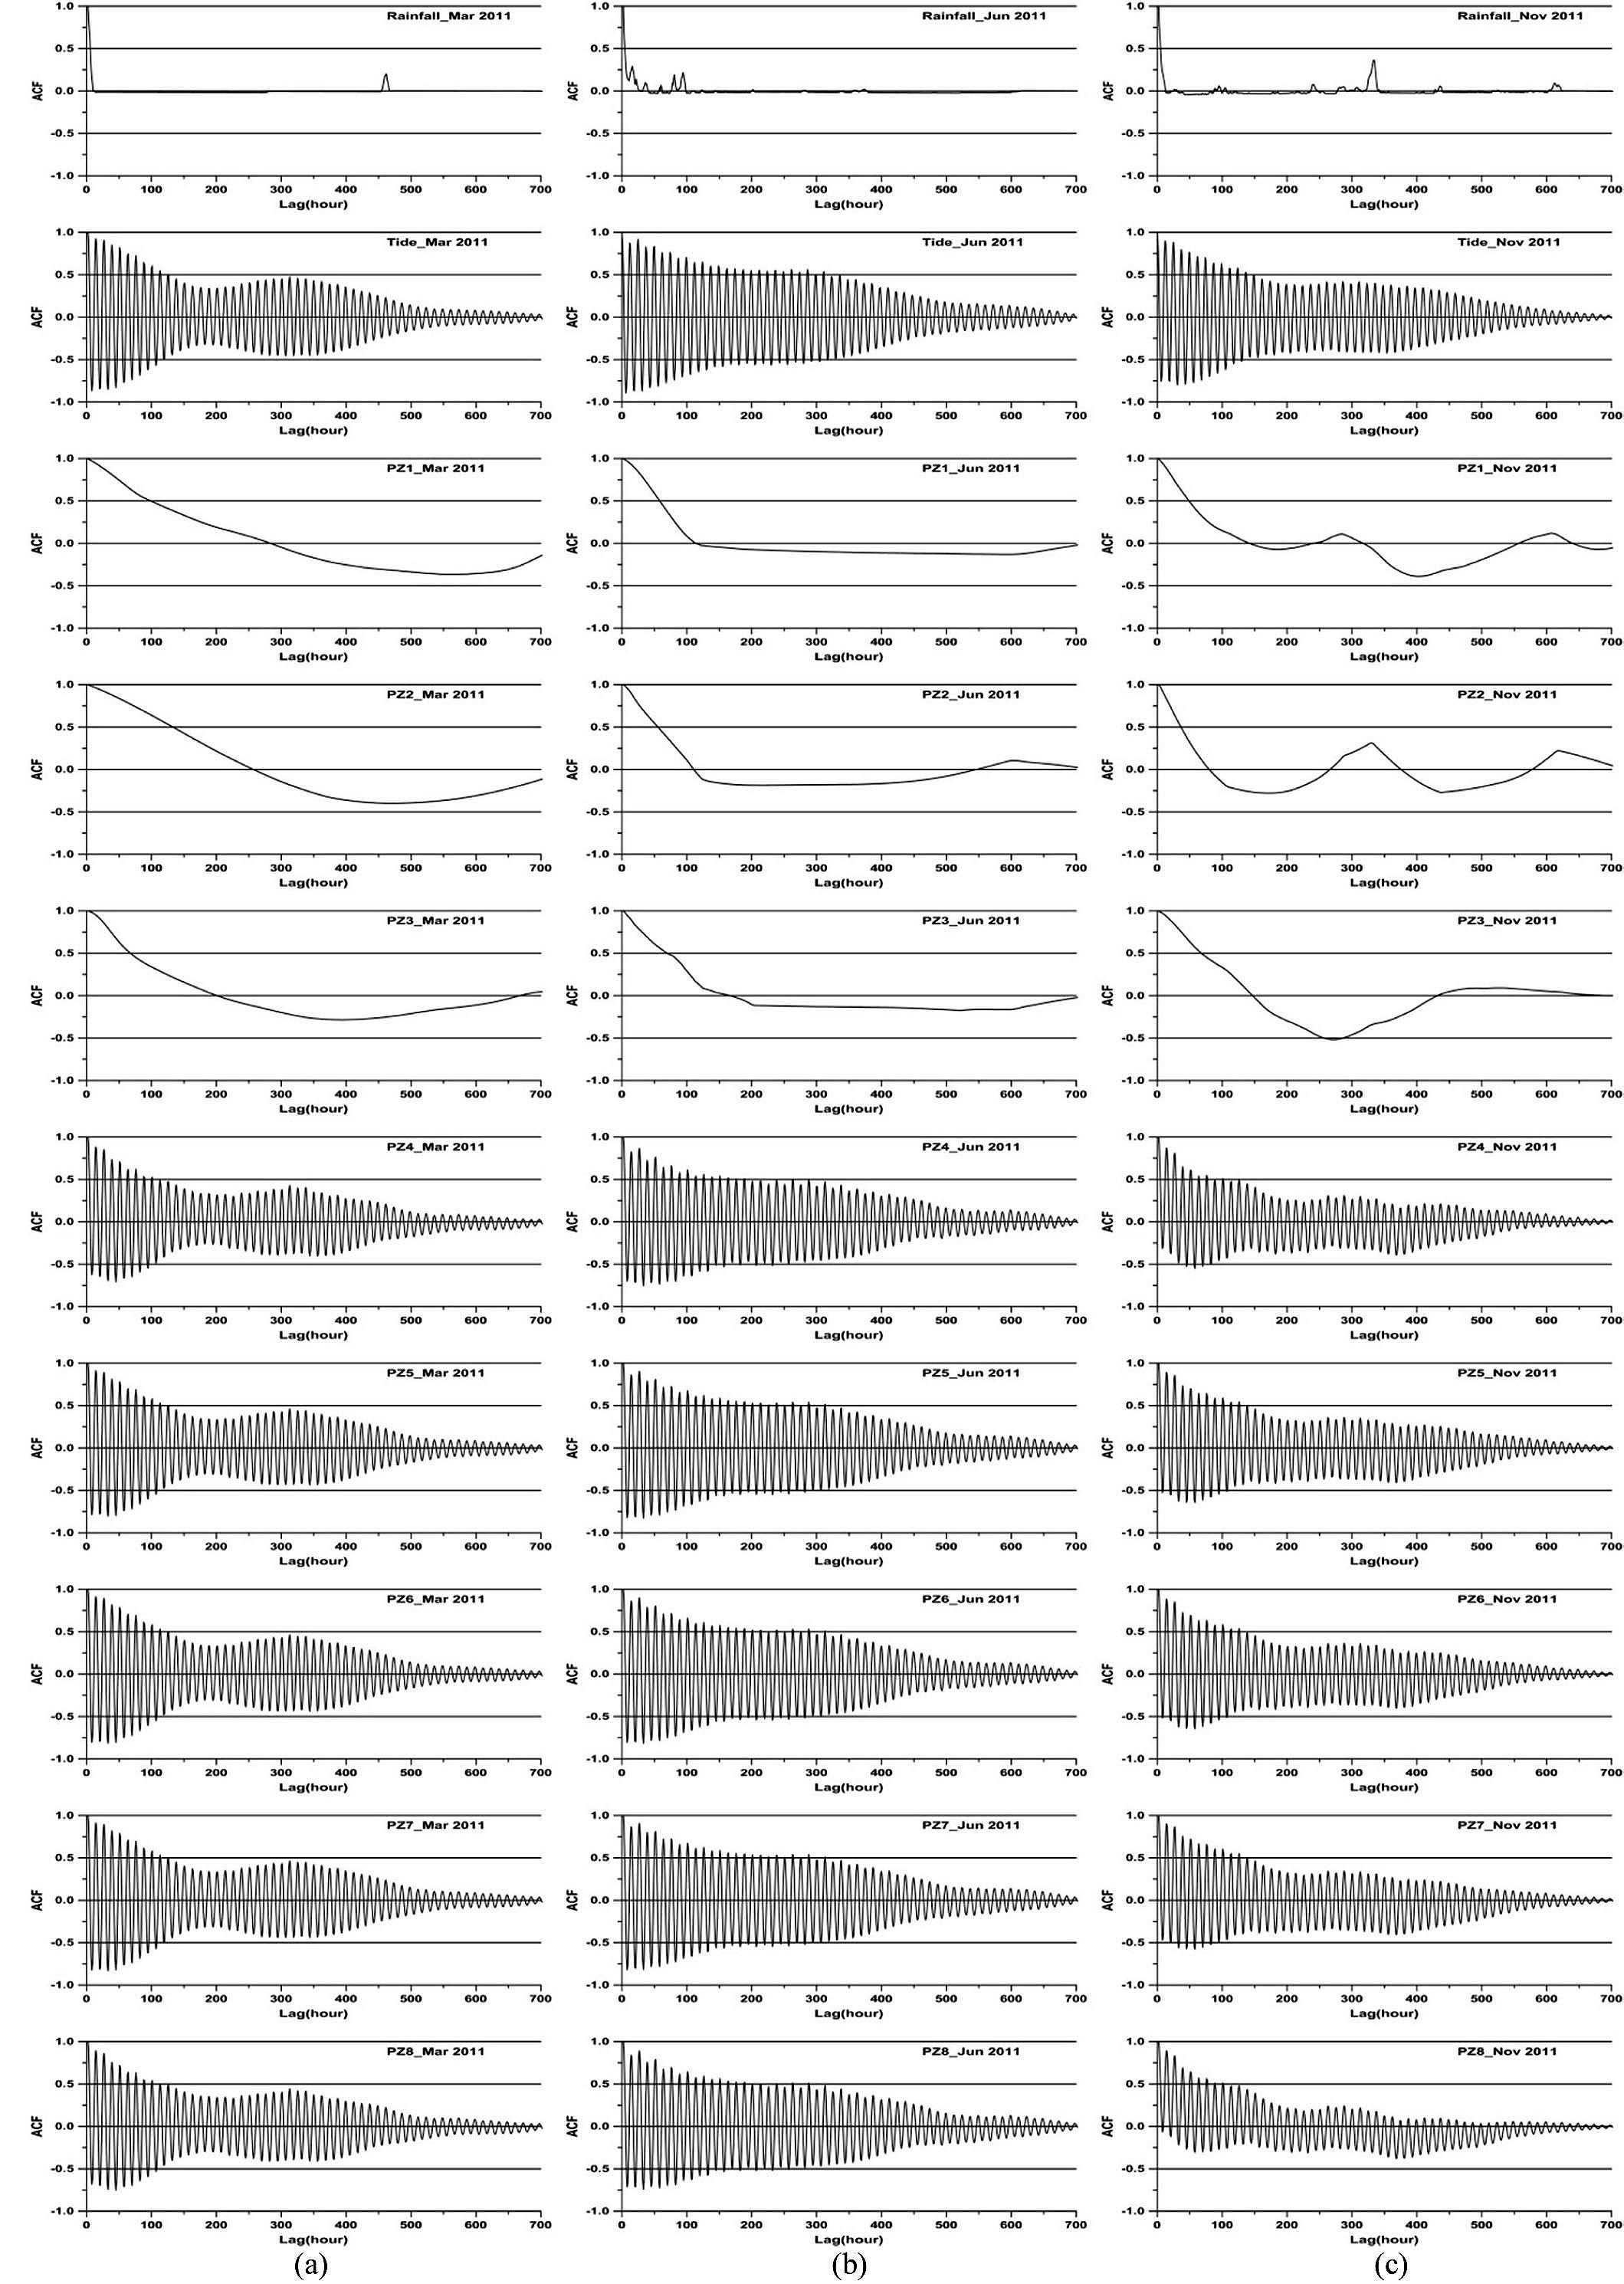 Auto-correlation Function (ACF) of Analysis Period Data for (a) March, (b) June and (c) November in 2011